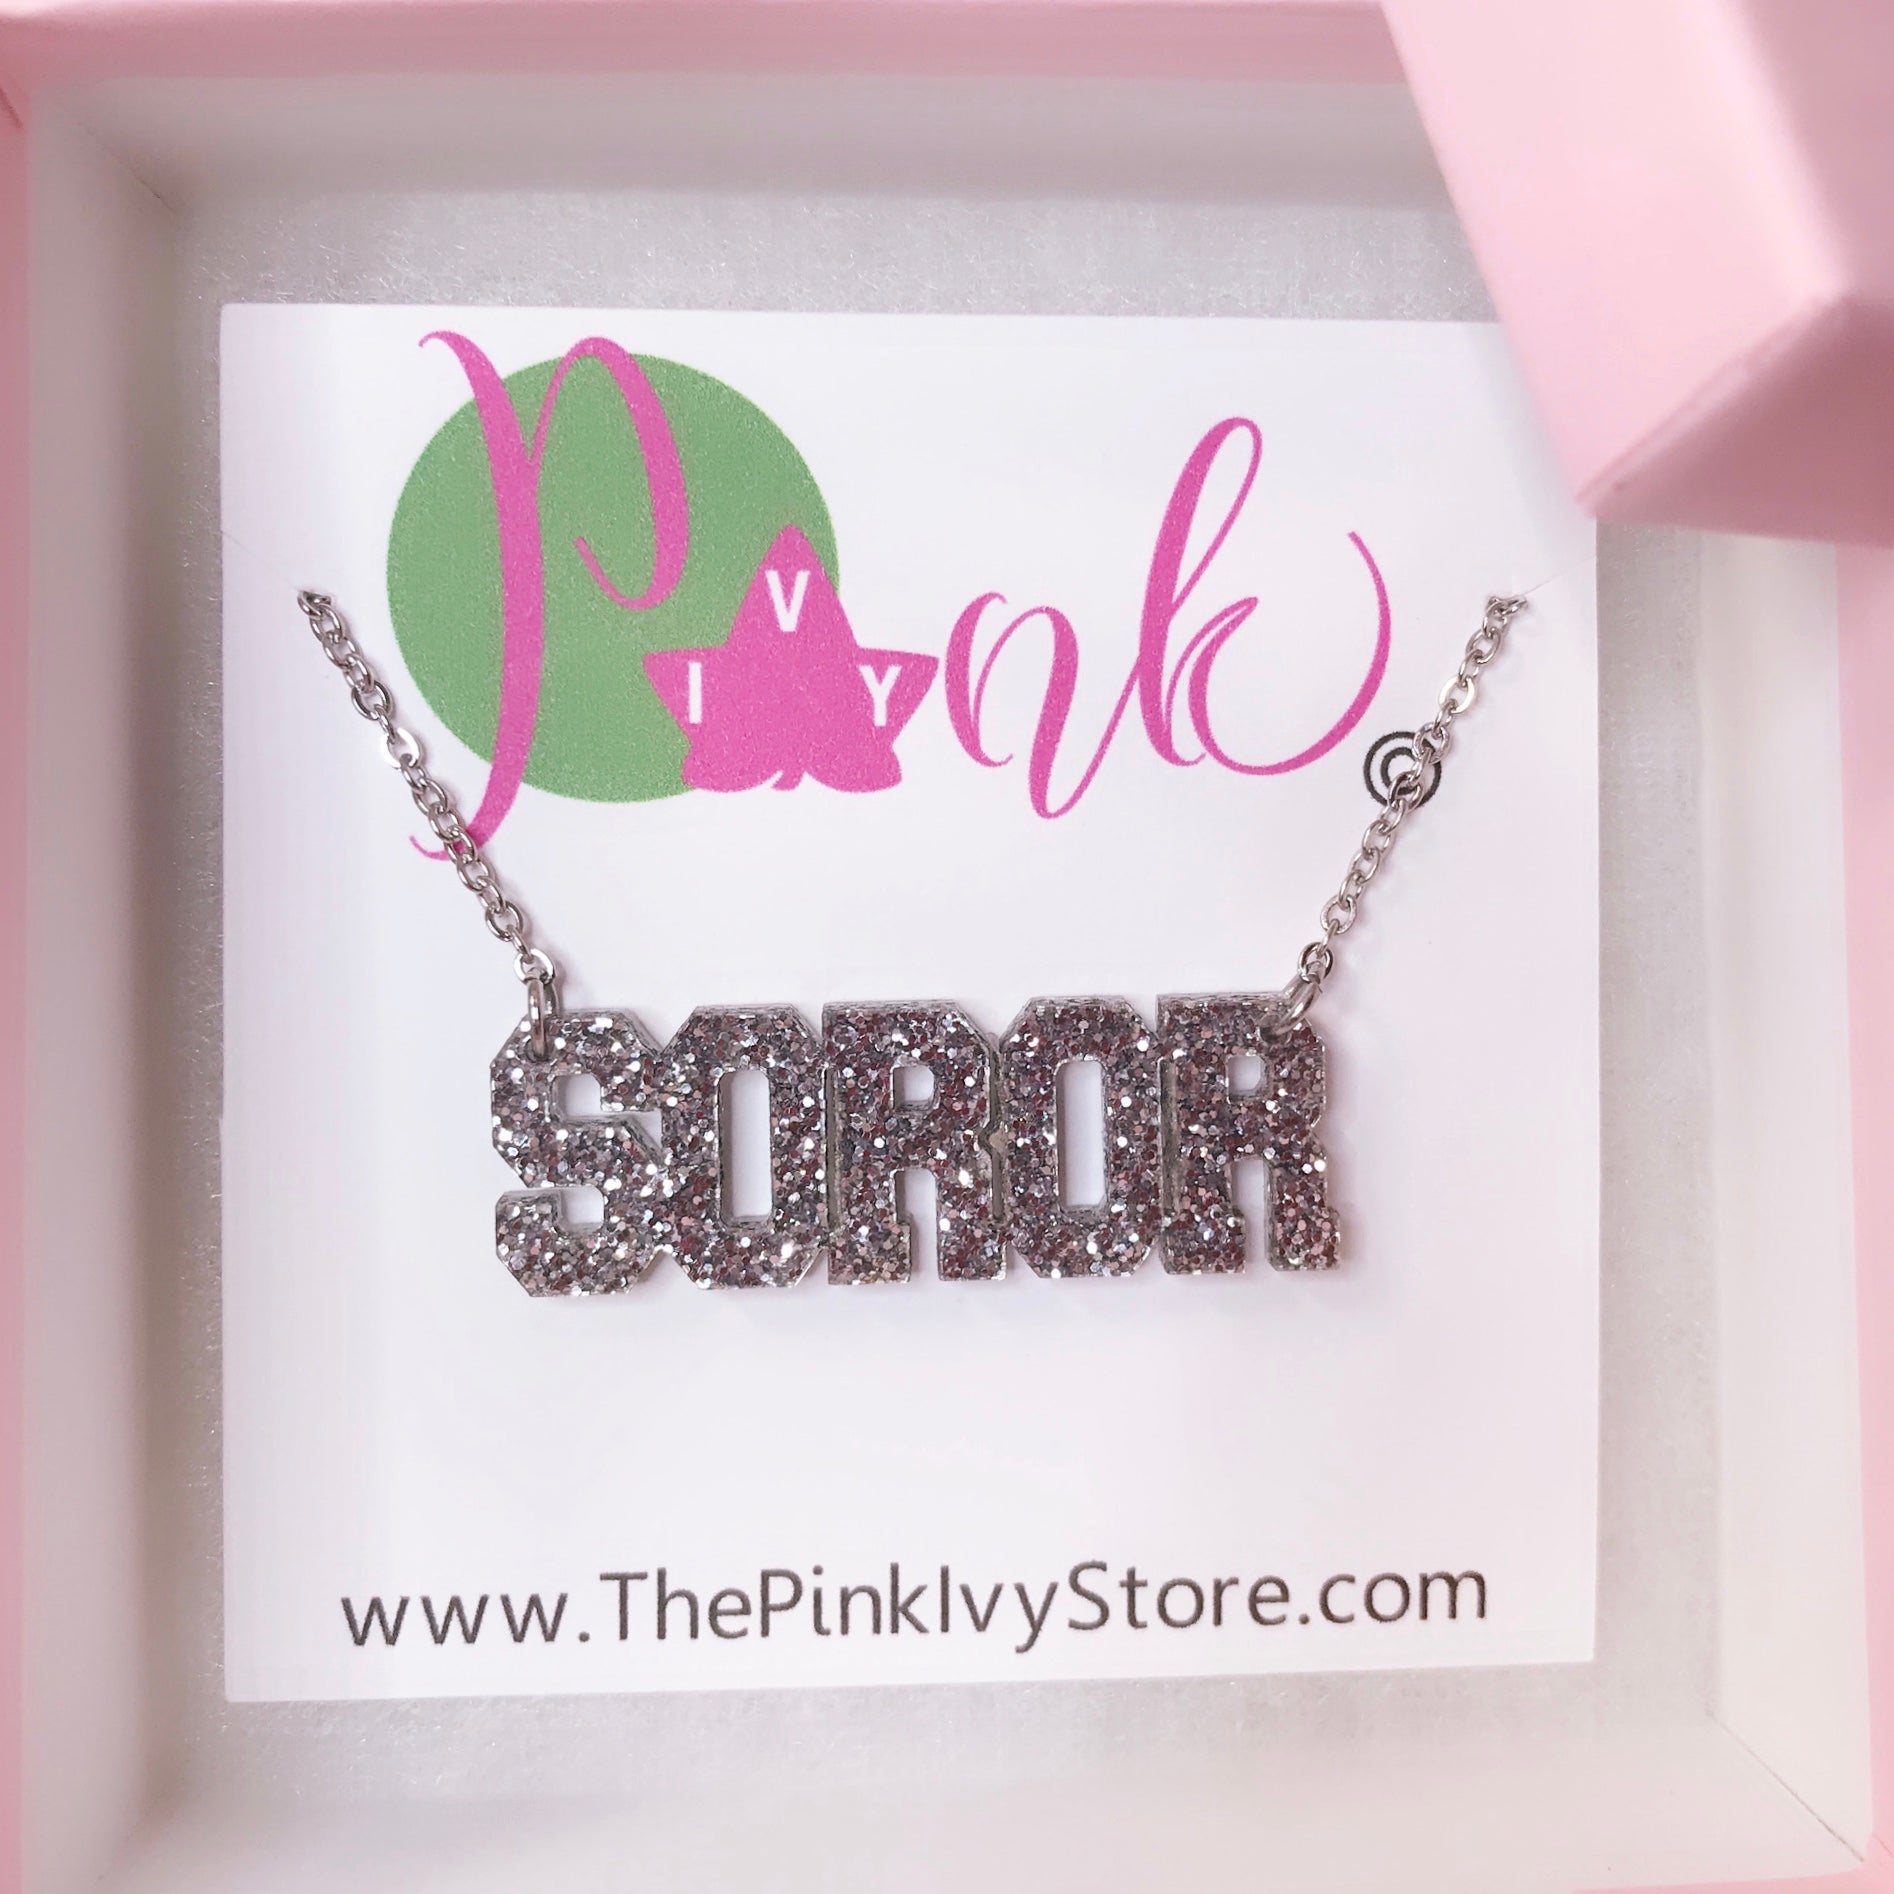 Silver glitter Soror necklace by The Chic Greek.